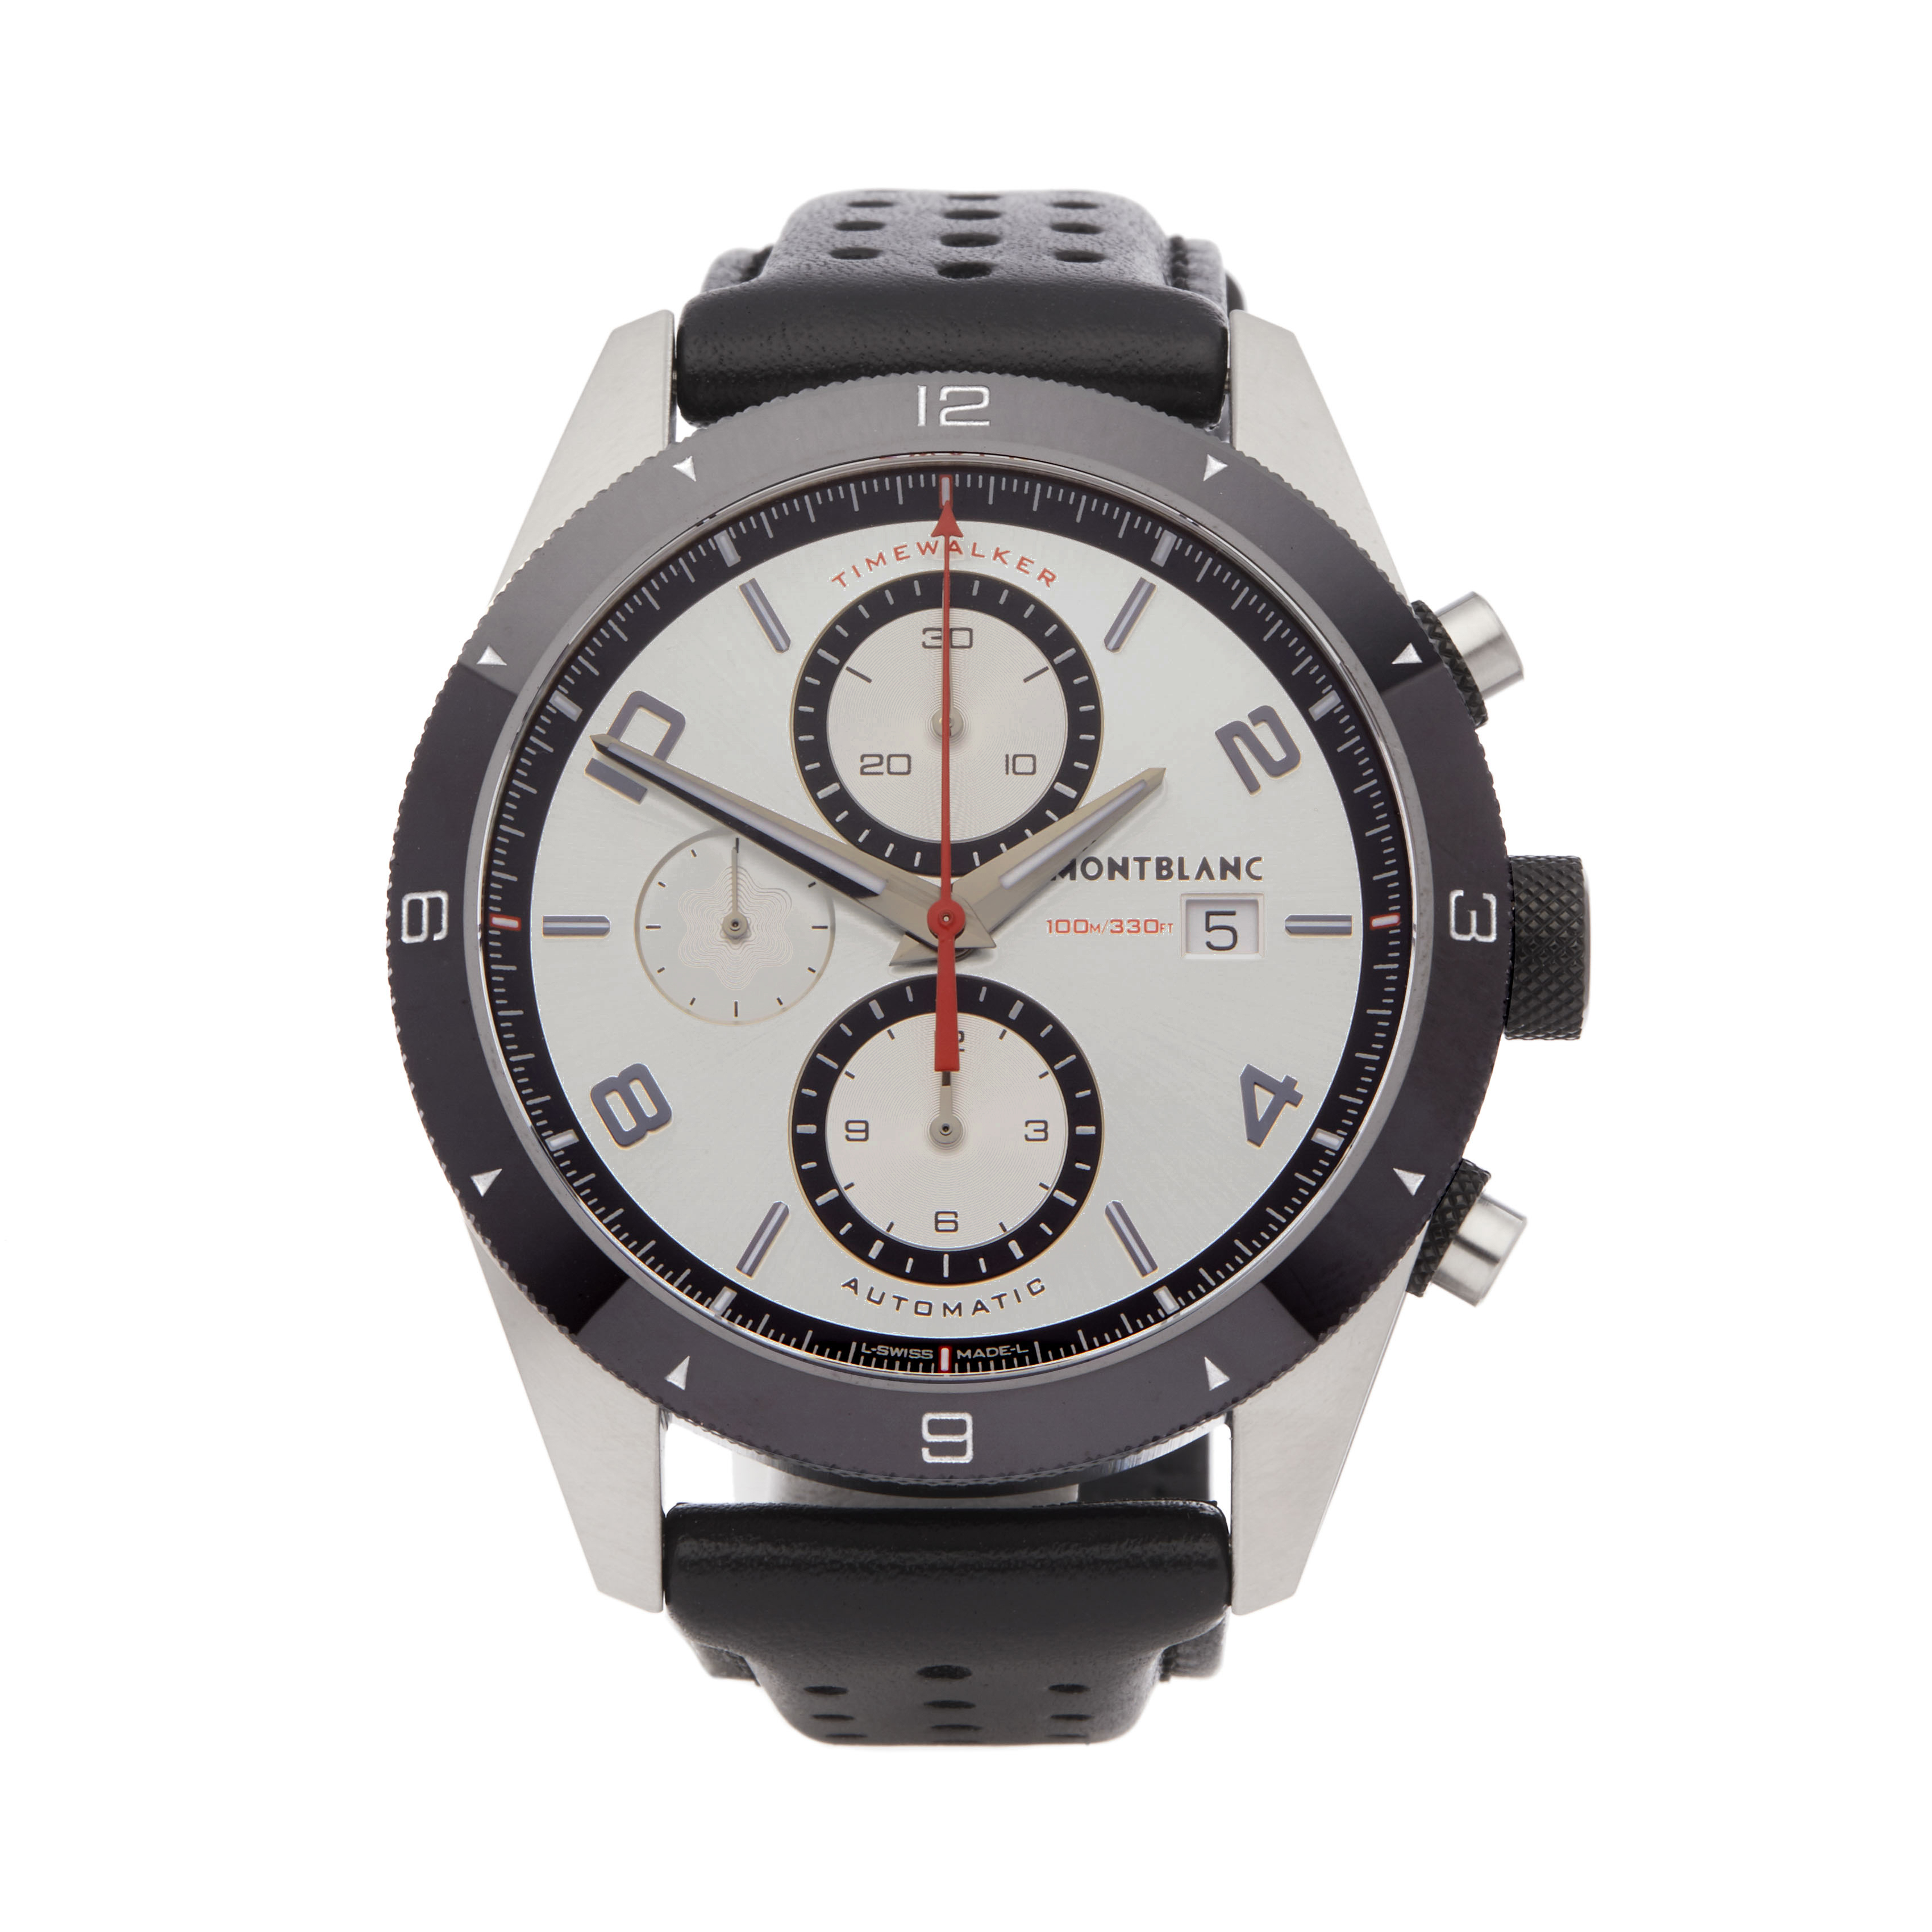 2019 Montblanc Timewalker Chronograph Stainless Steel - 116100 - Image 9 of 9